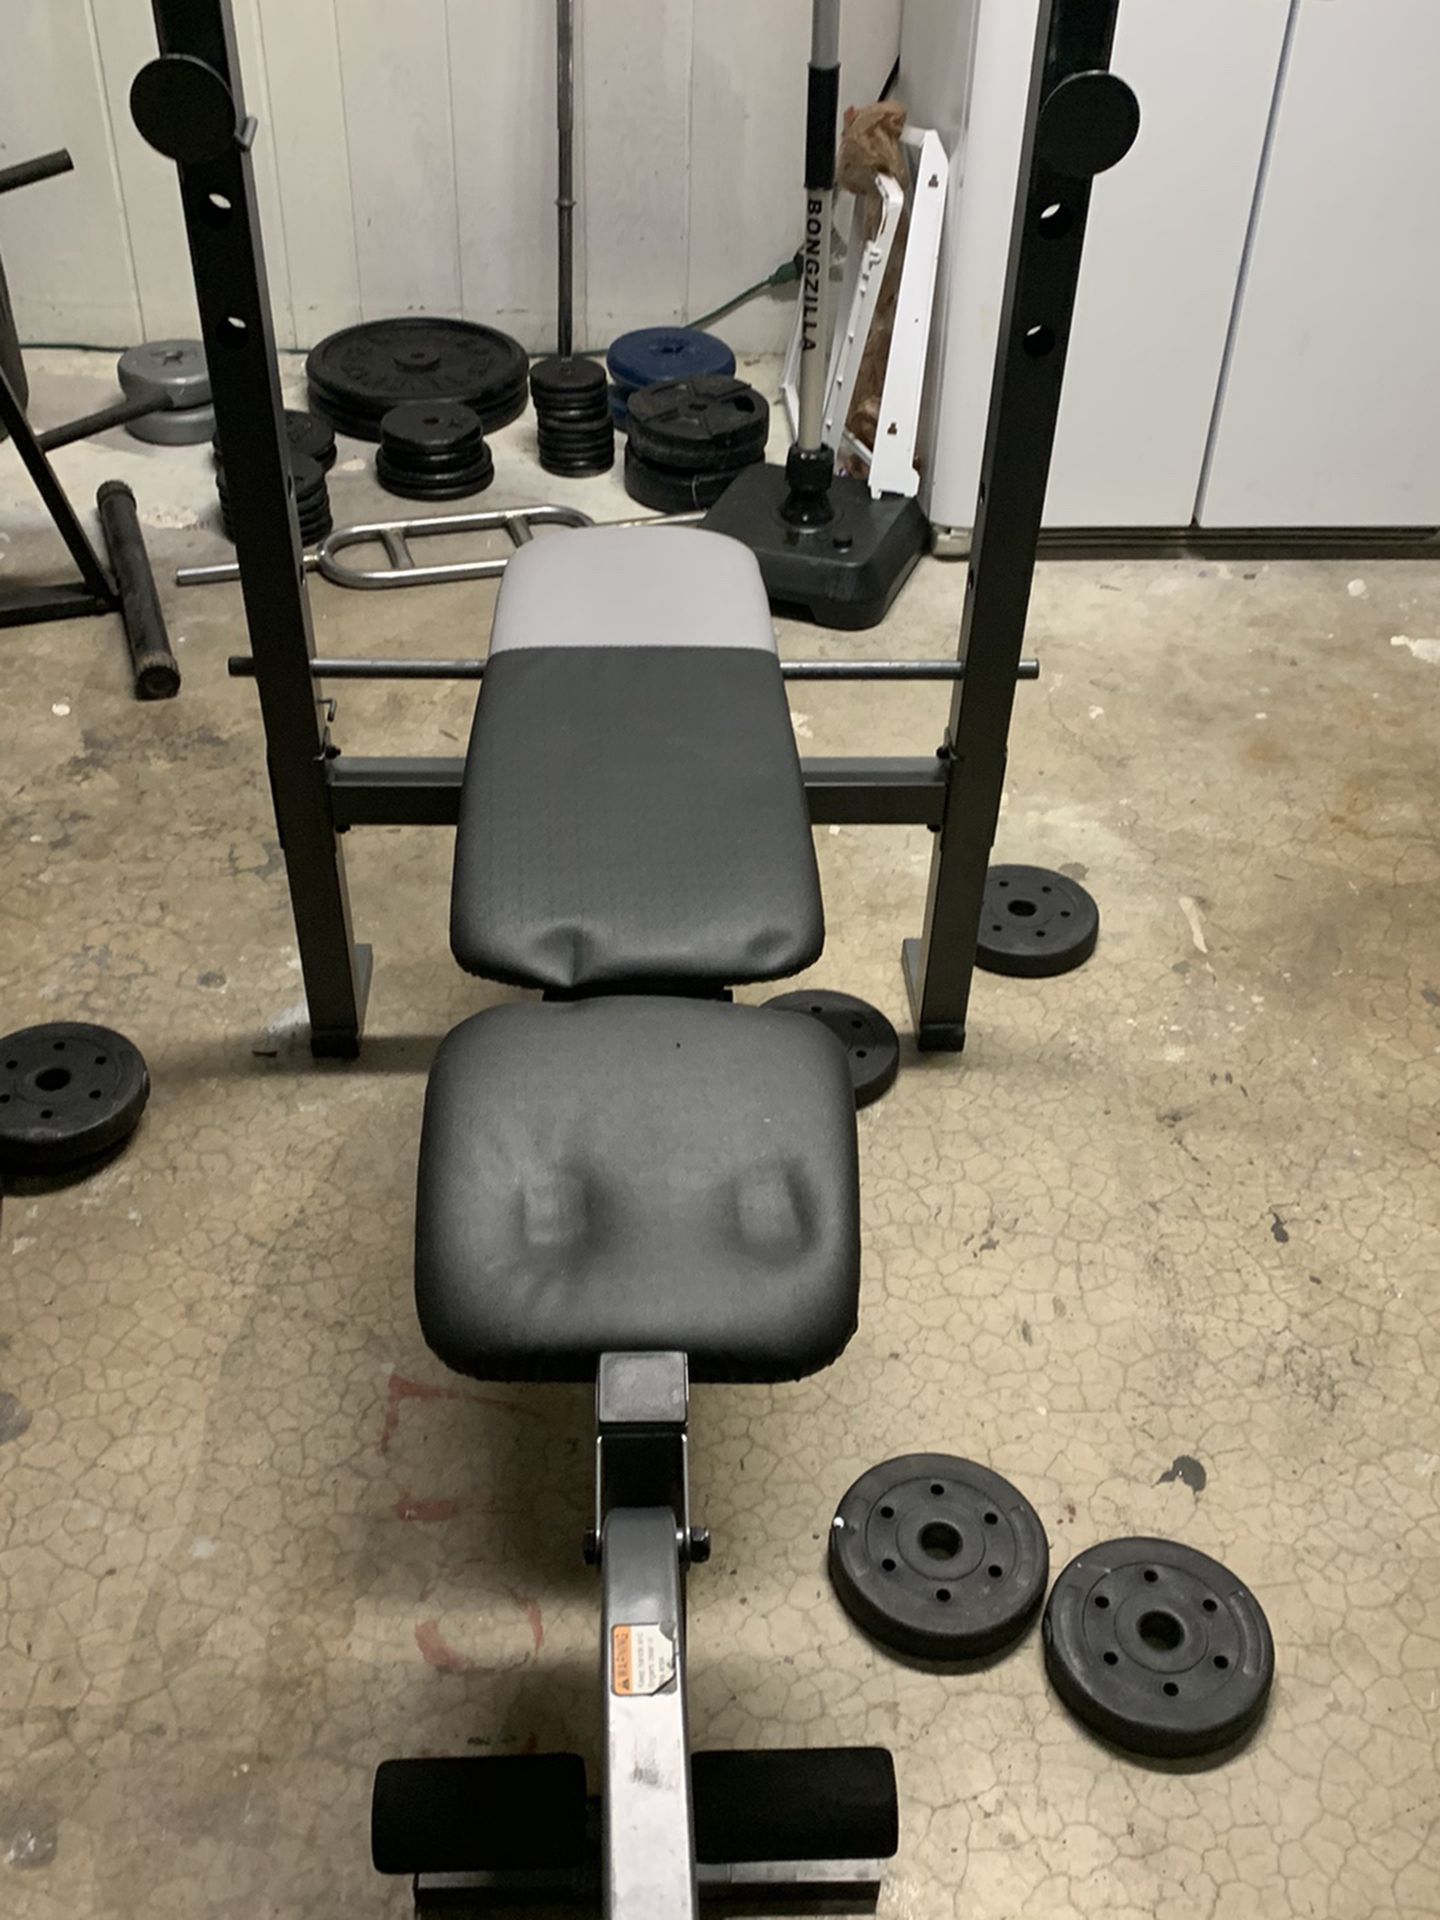 Bench With Barbell, Curl Bar And 235 Lbs Of Weight